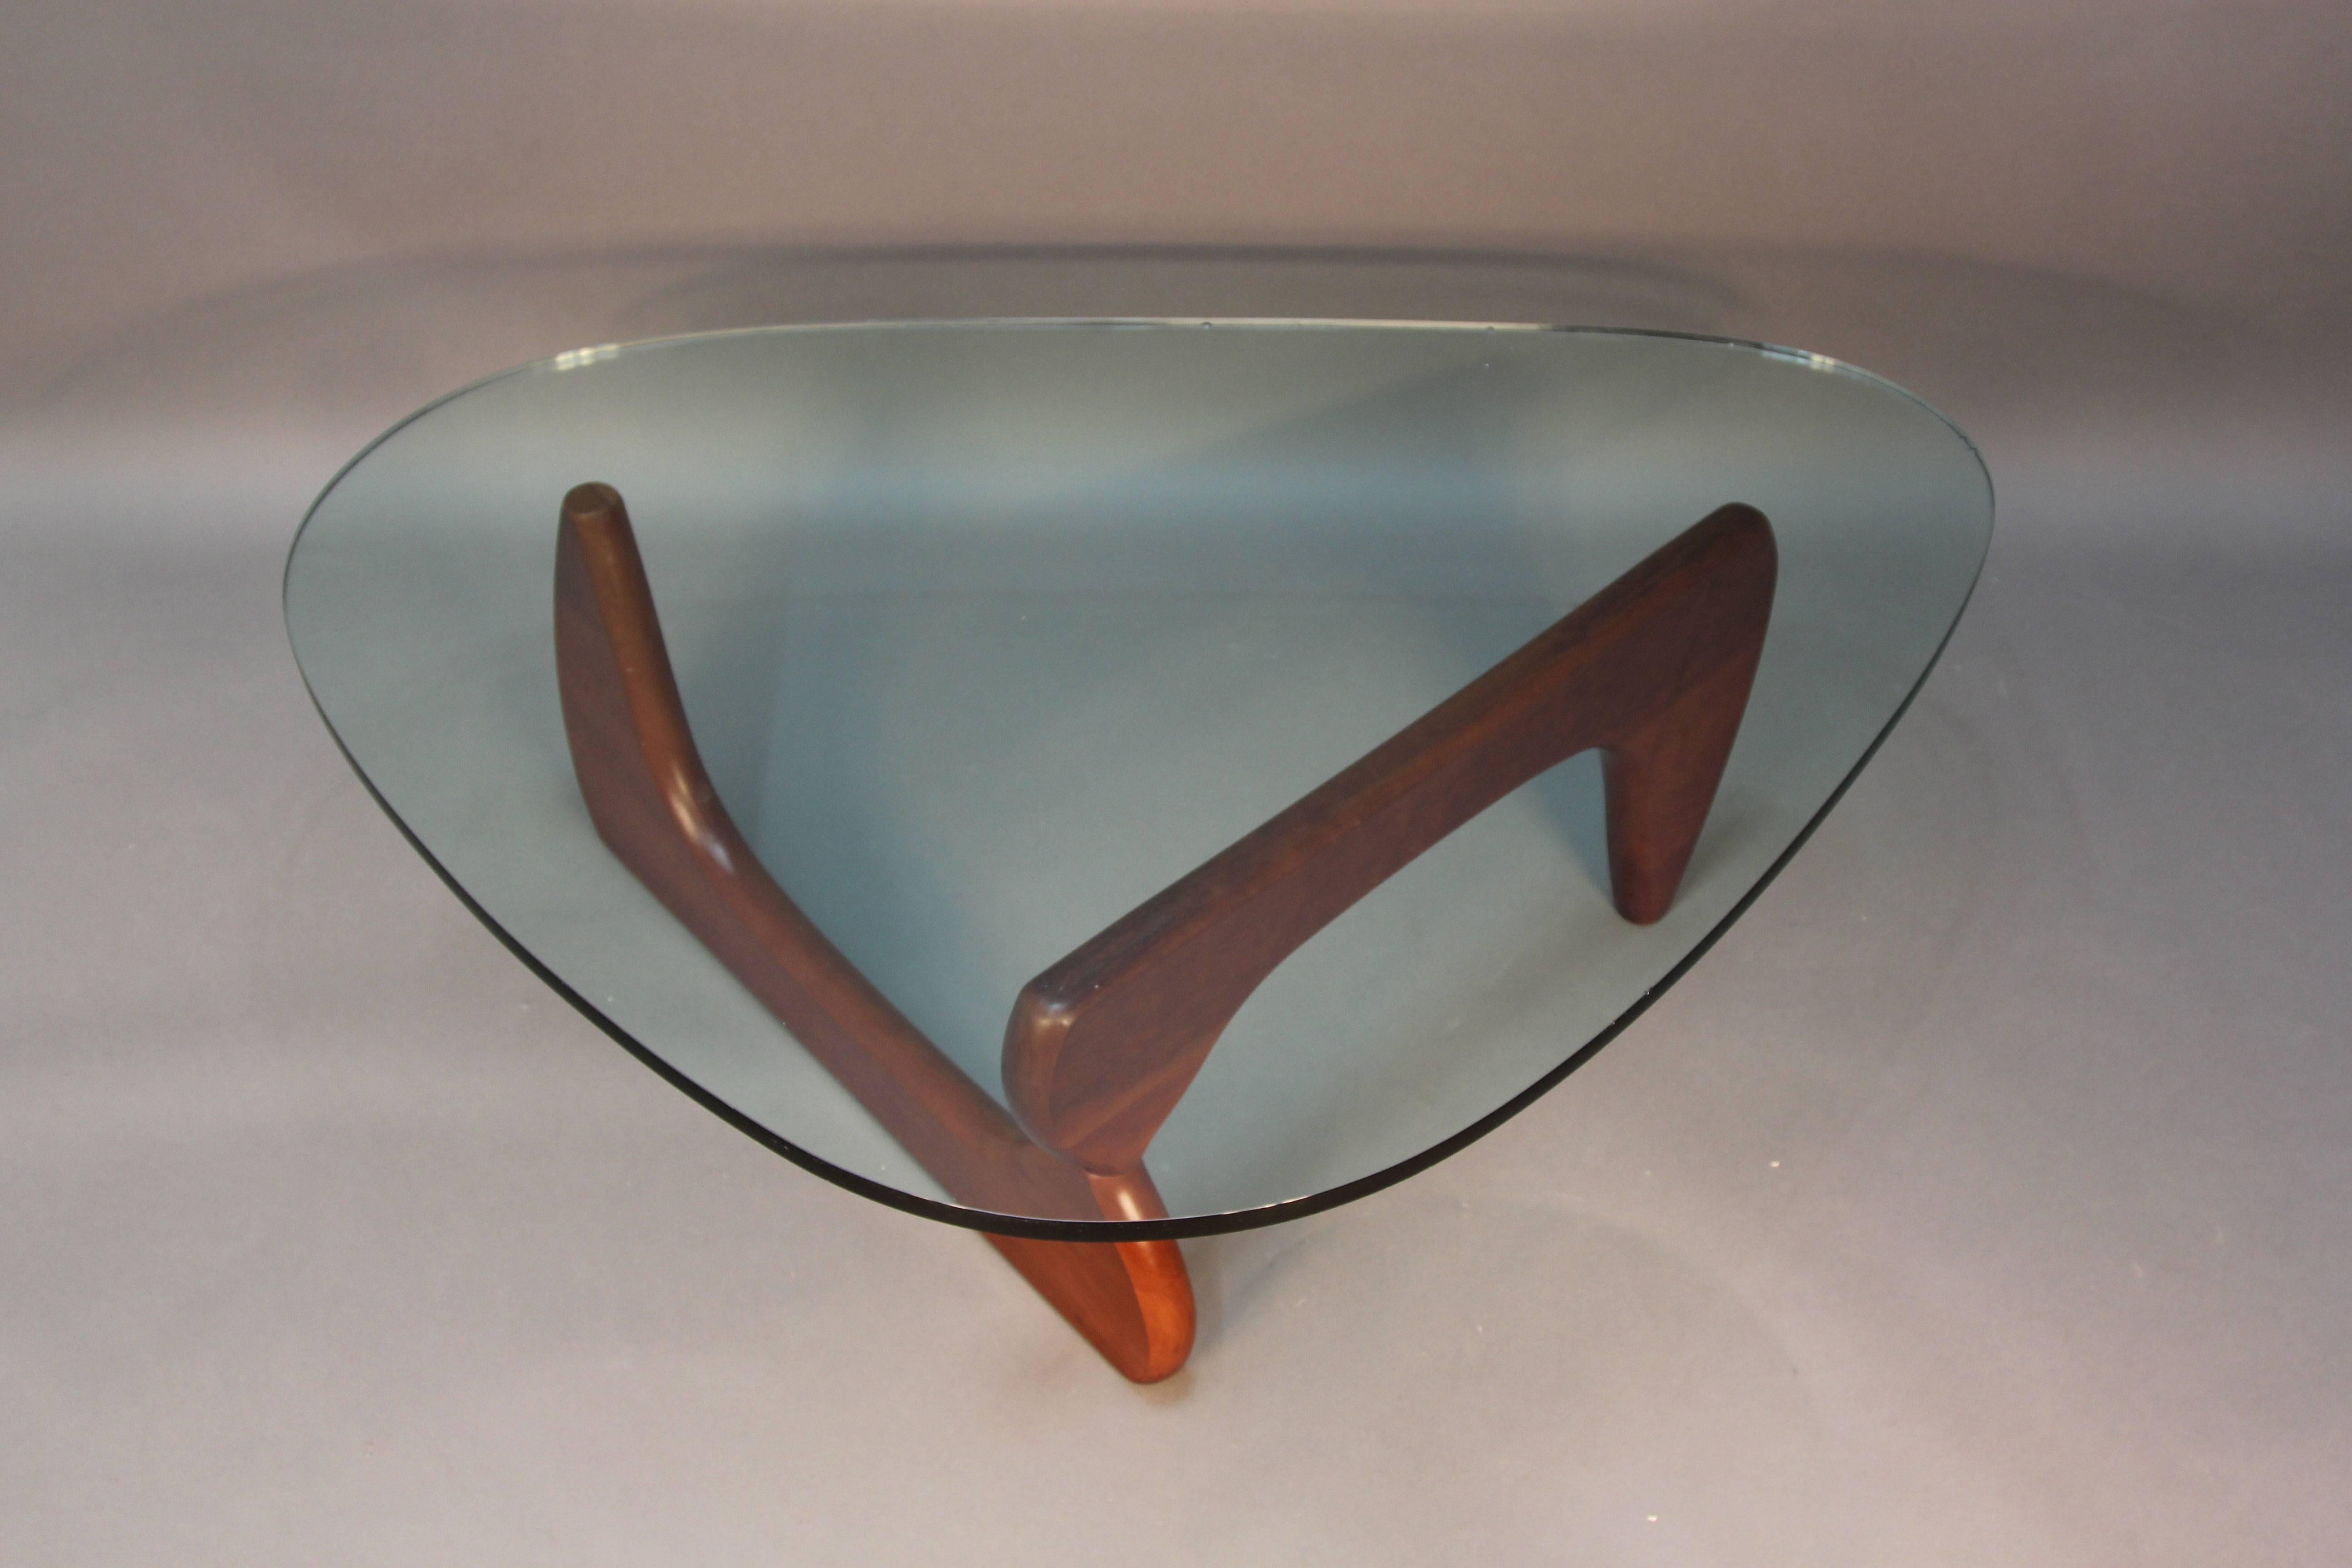 Isamu Noguchi coffee table signed for Herman Miller with original label.

His relationship with Herman Miller came about when a design of his was used to illustrate an article written by George Nelson called 